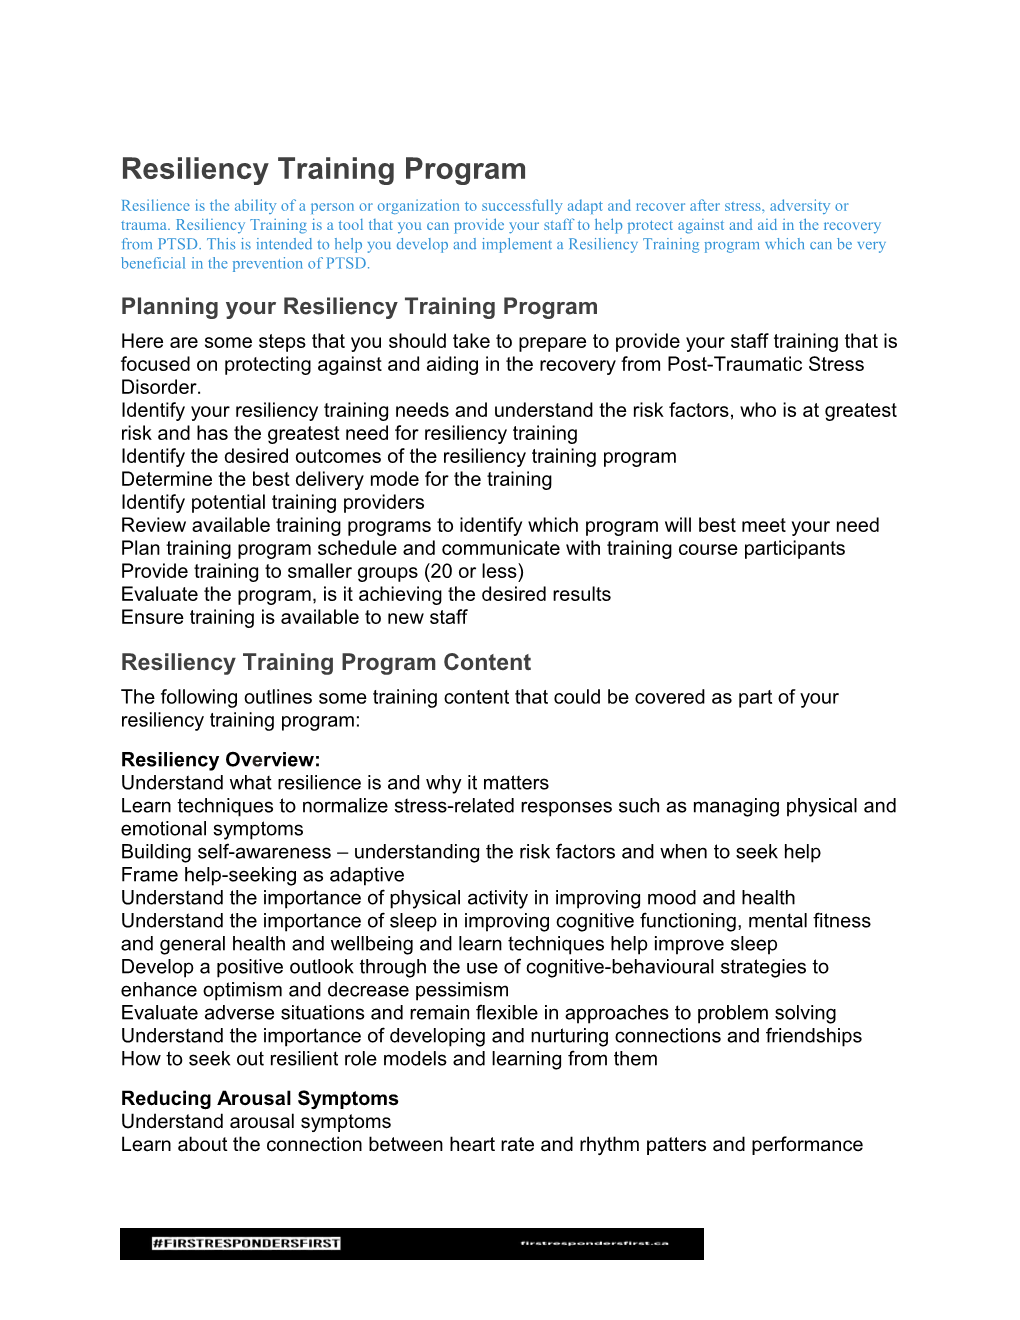 Planning Your Resiliency Training Program